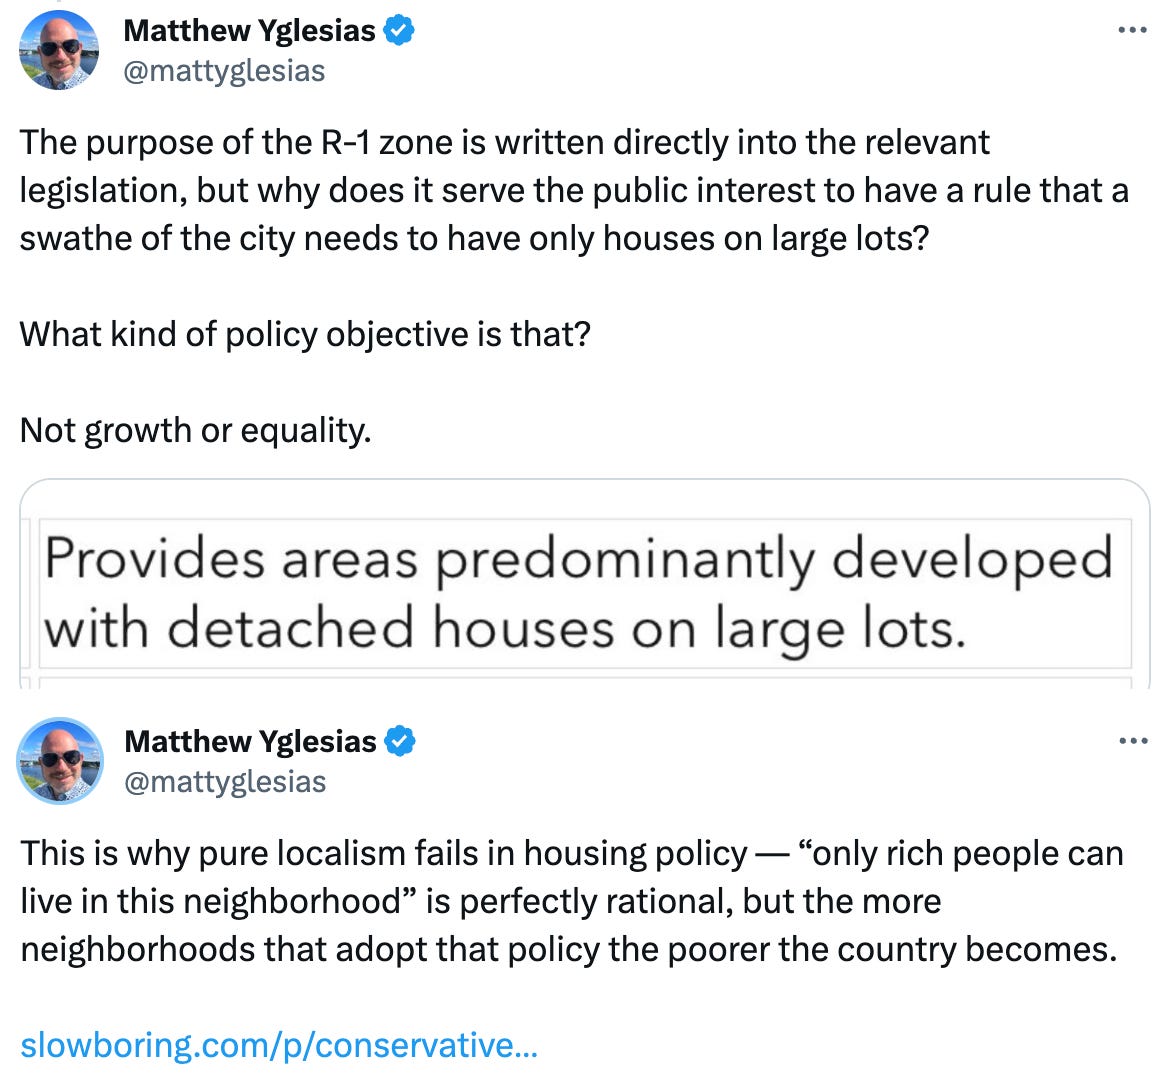  See new posts Conversation Matthew Yglesias @mattyglesias This is why pure localism fails in housing policy — “only rich people can live in this neighborhood” is perfectly rational, but the more neighborhoods that adopt that policy the poorer the country becomes.   https://slowboring.com/p/conservatives-terrible-case-for-more Quote Matthew Yglesias @mattyglesias · Jan 14 Replying to @mattyglesias The purpose of the R-1 zone is written directly into the relevant legislation, but why does it serve the public interest to have a rule that a swathe of the city needs to have only houses on large lots?   What kind of policy objective is that?   Not growth or equality. Show more